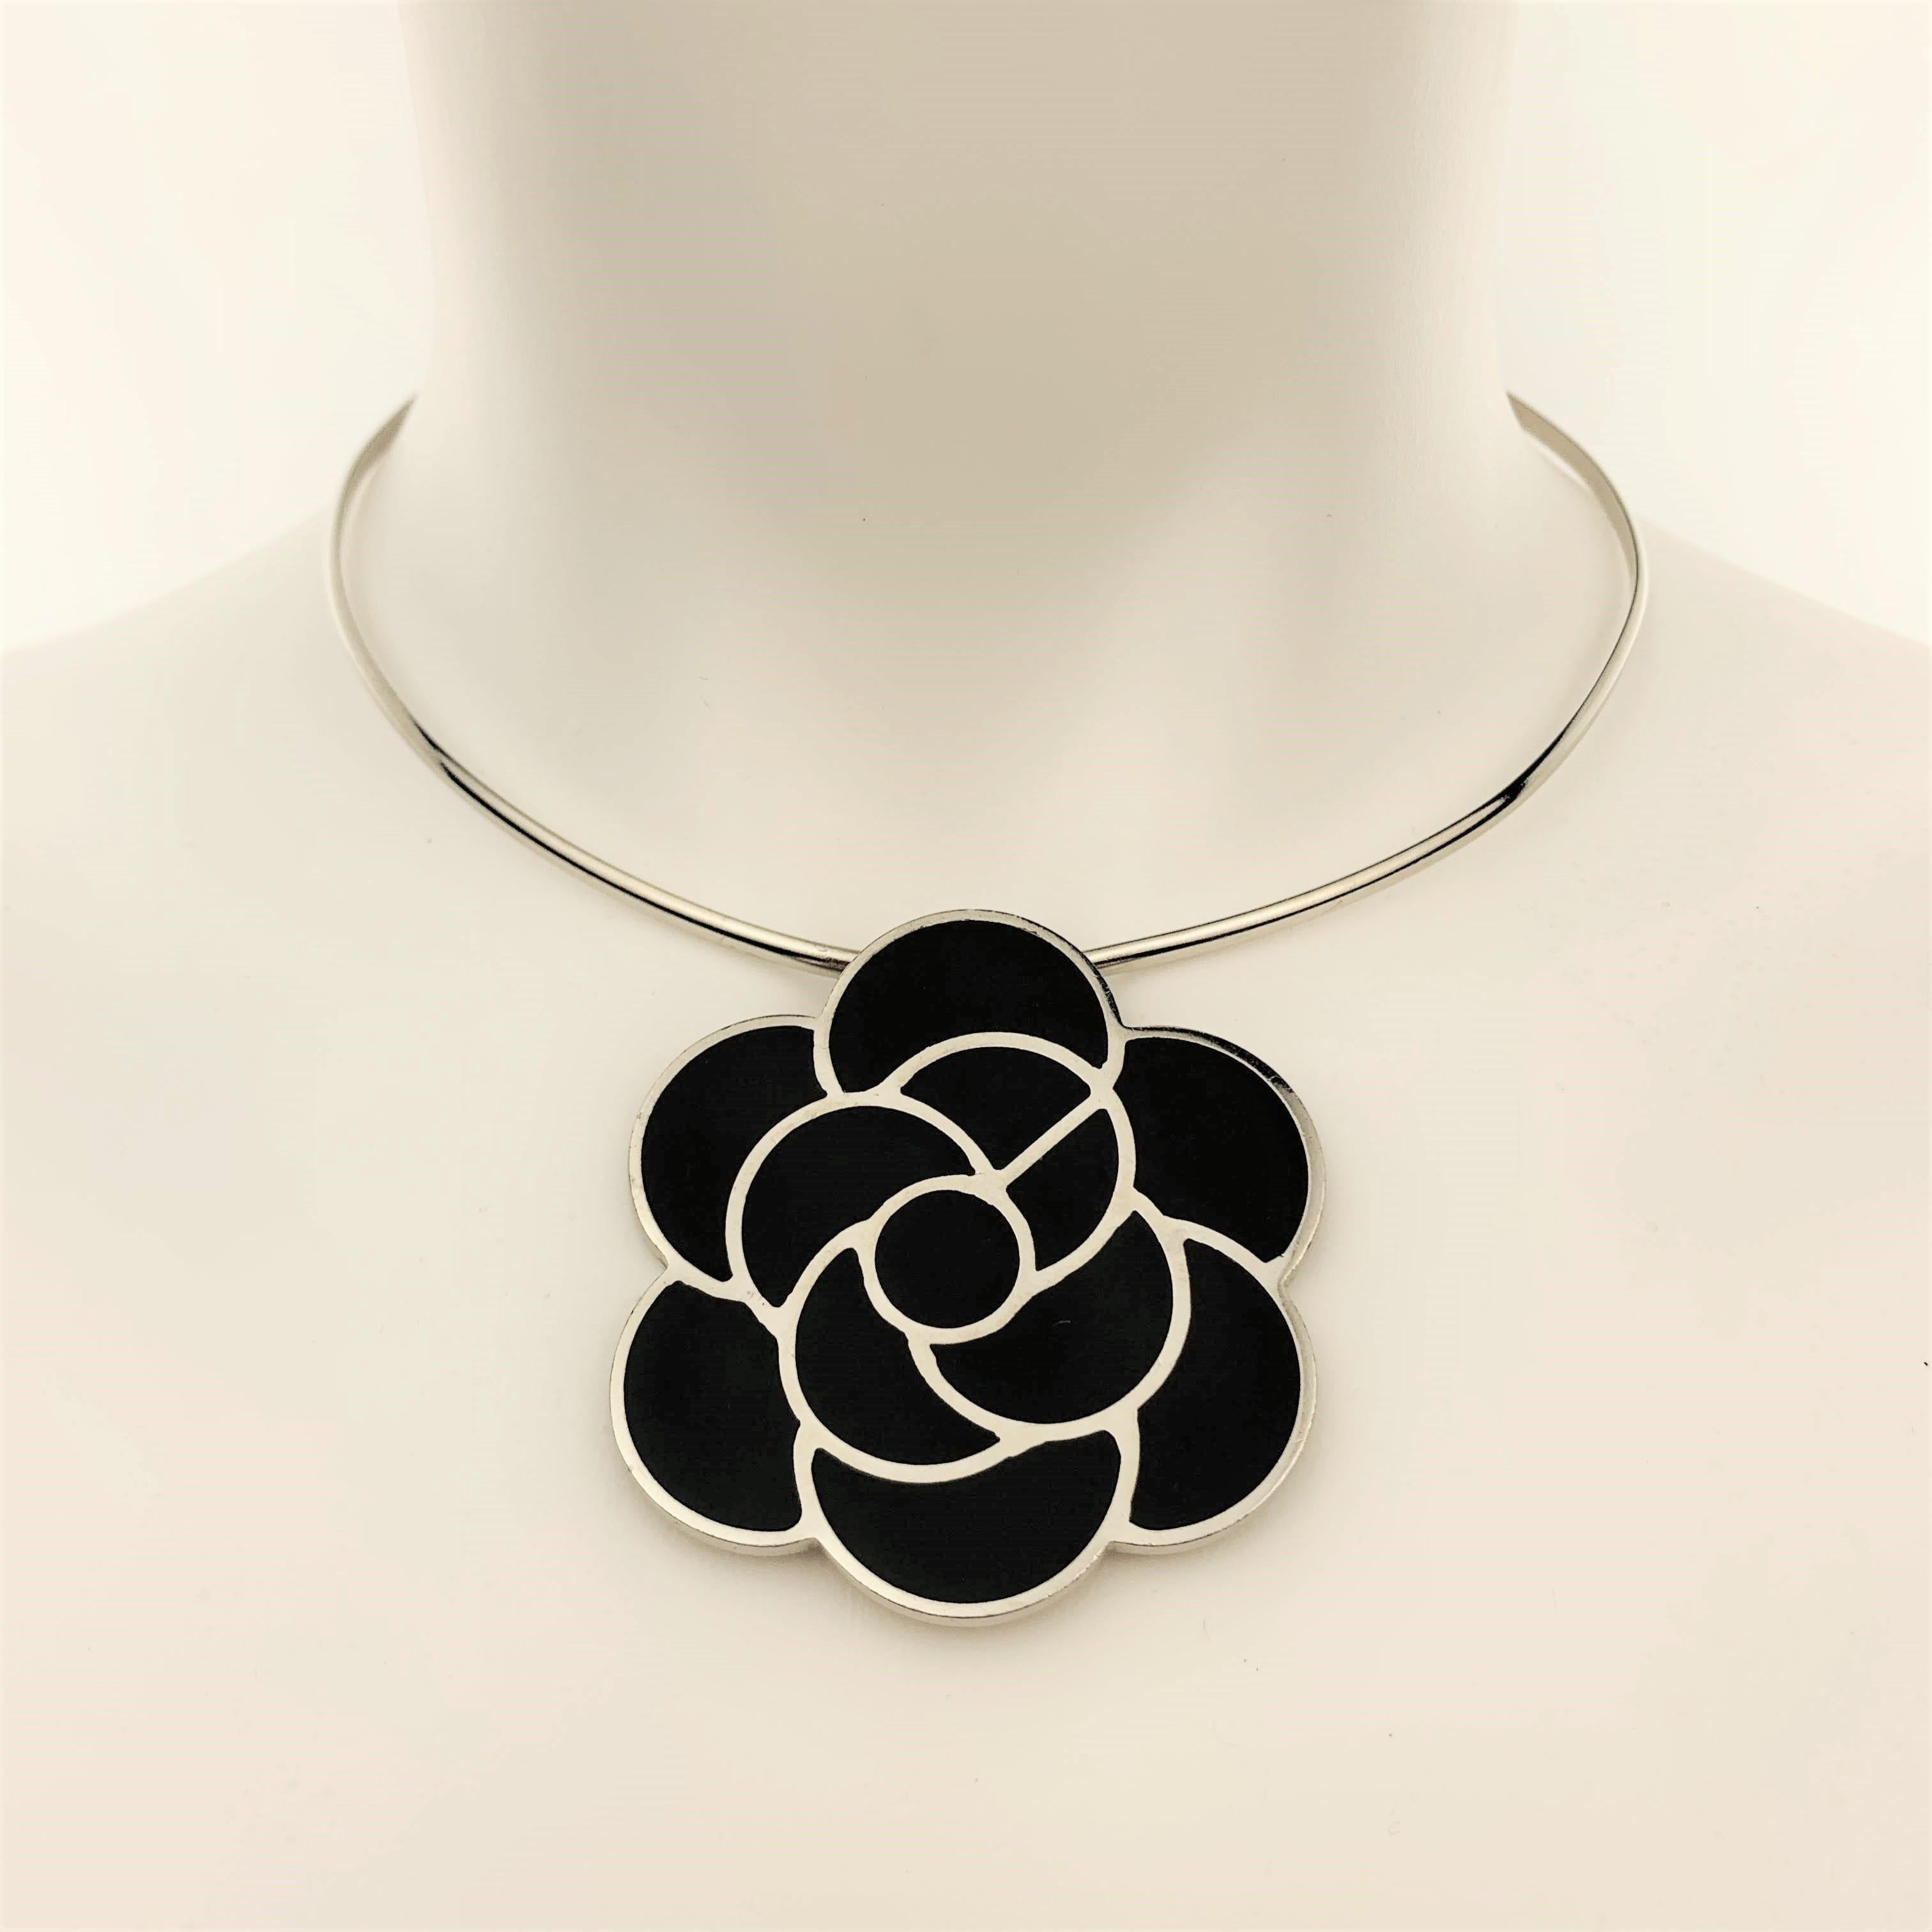 Vintage CHANEL circa 1998 choker necklace features a stiff silver tone metal necklace with chain closure back and black enamel Camellia pendant. Made in France.
 
Very Good Pre-Owned Condition.
Marked: 98 P
 
Necklace: 15 in.
Pendant: 5 x 5 cm.